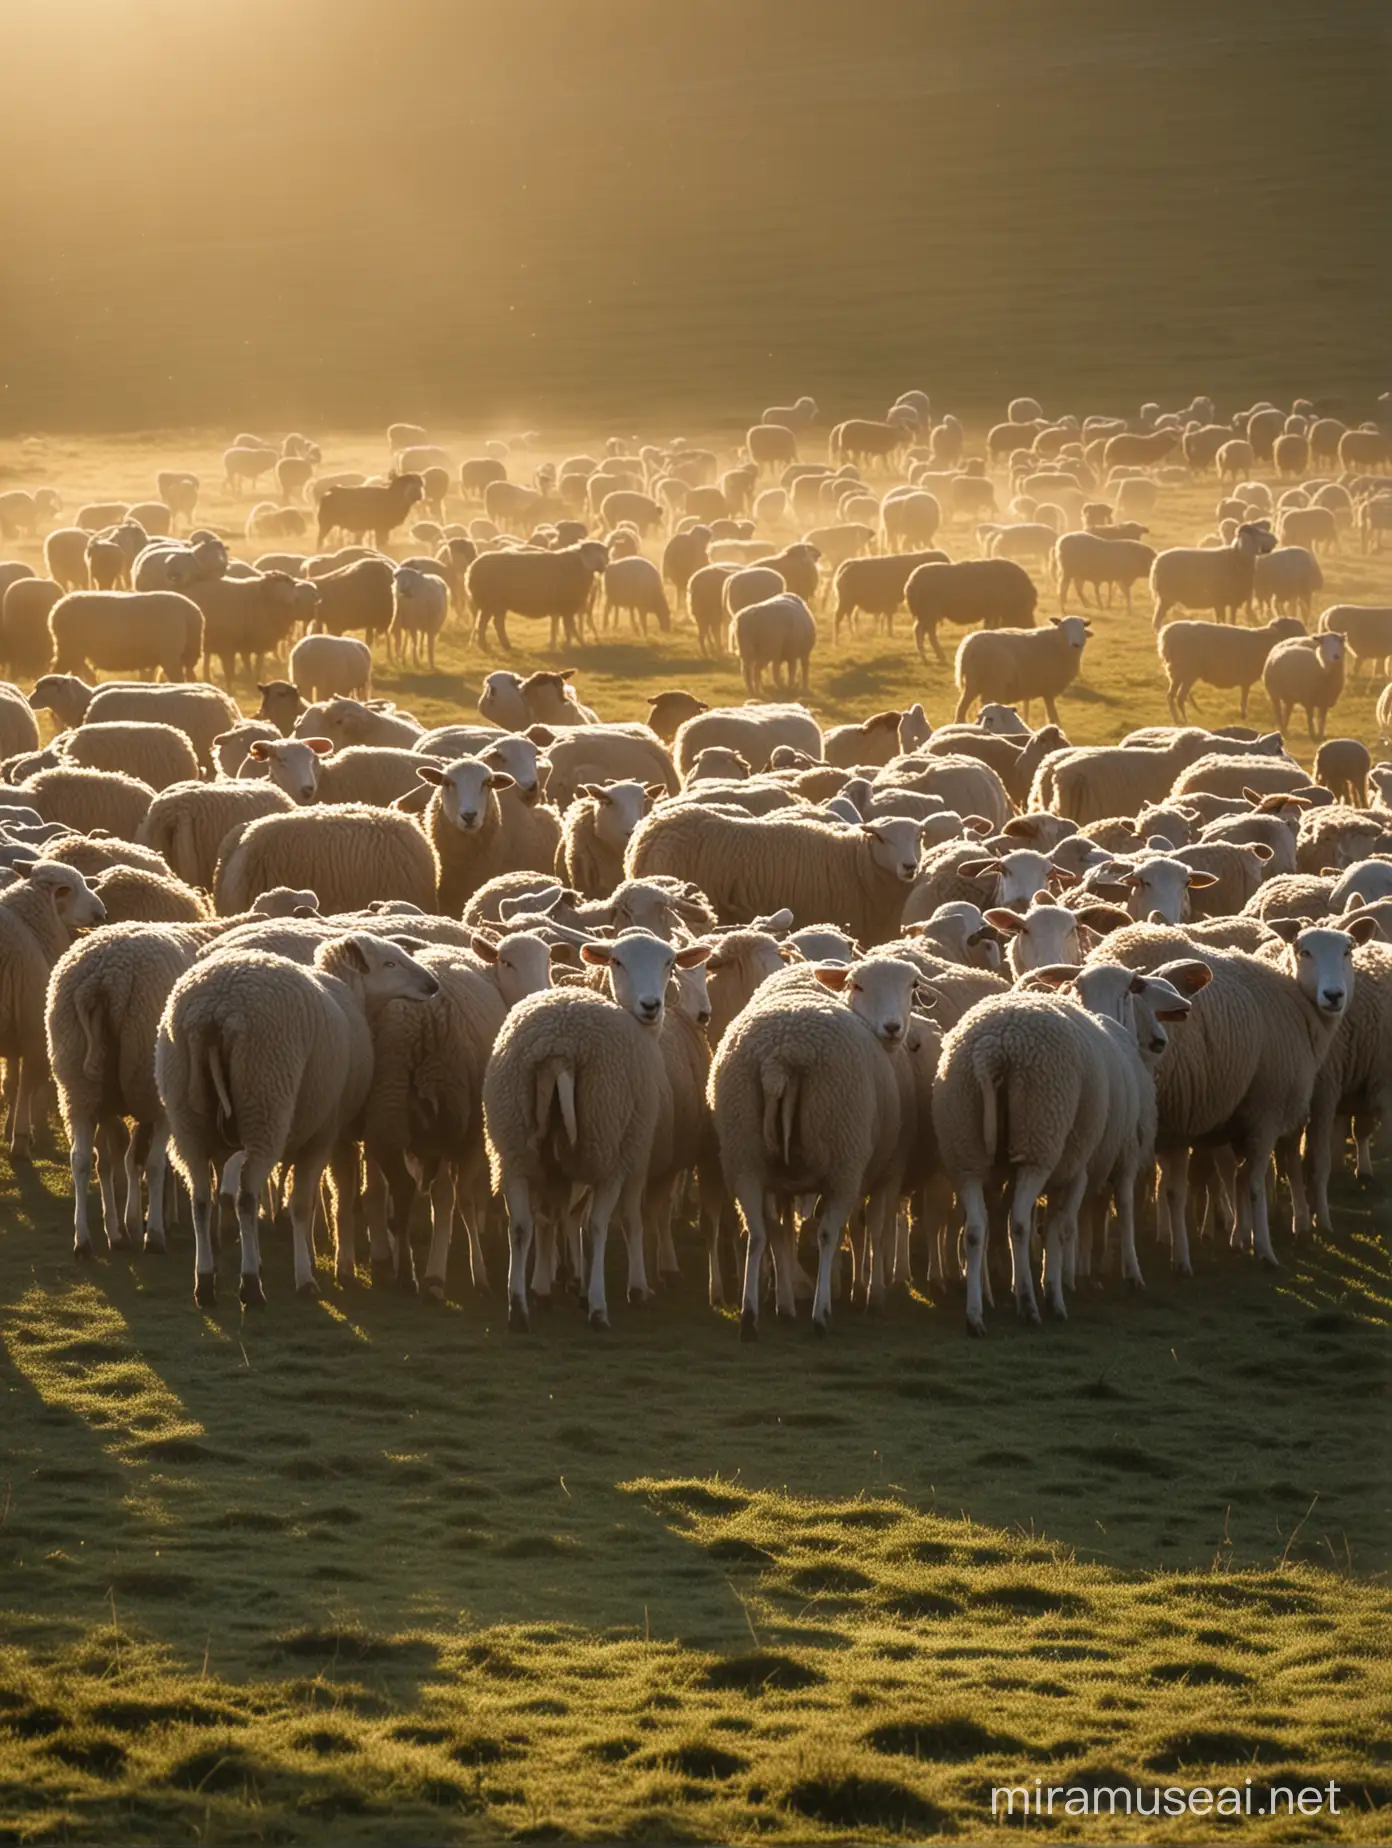 Sunset Silhouette of a Grazing Sheep Herd